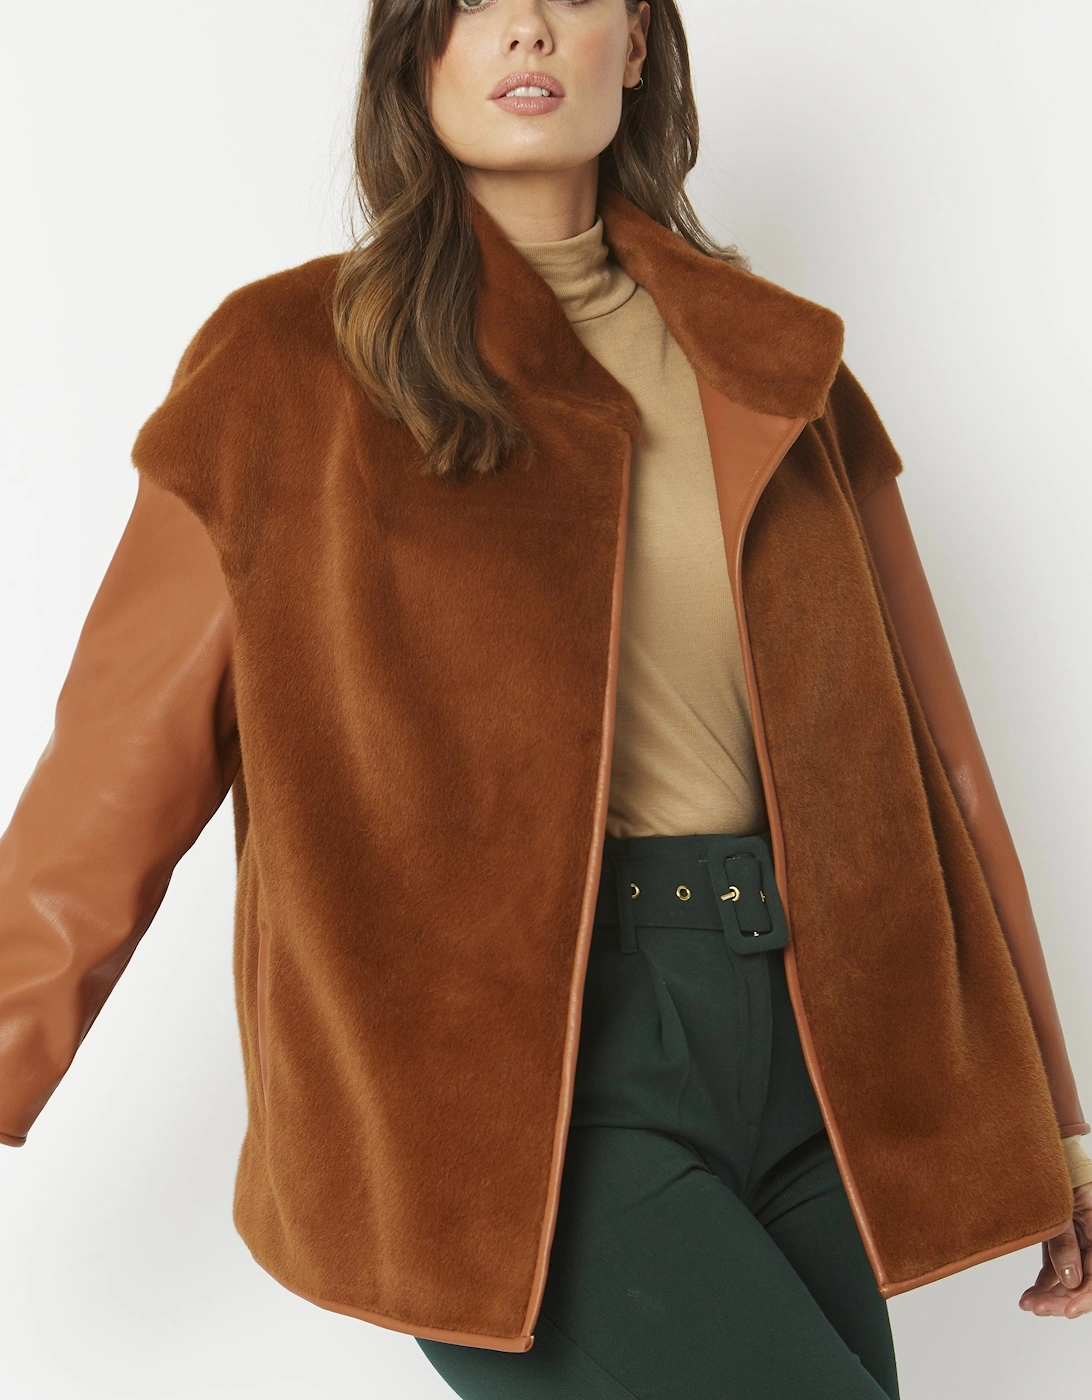 Chocolate Faux Fur Jacket with Leather Effect Sleeve